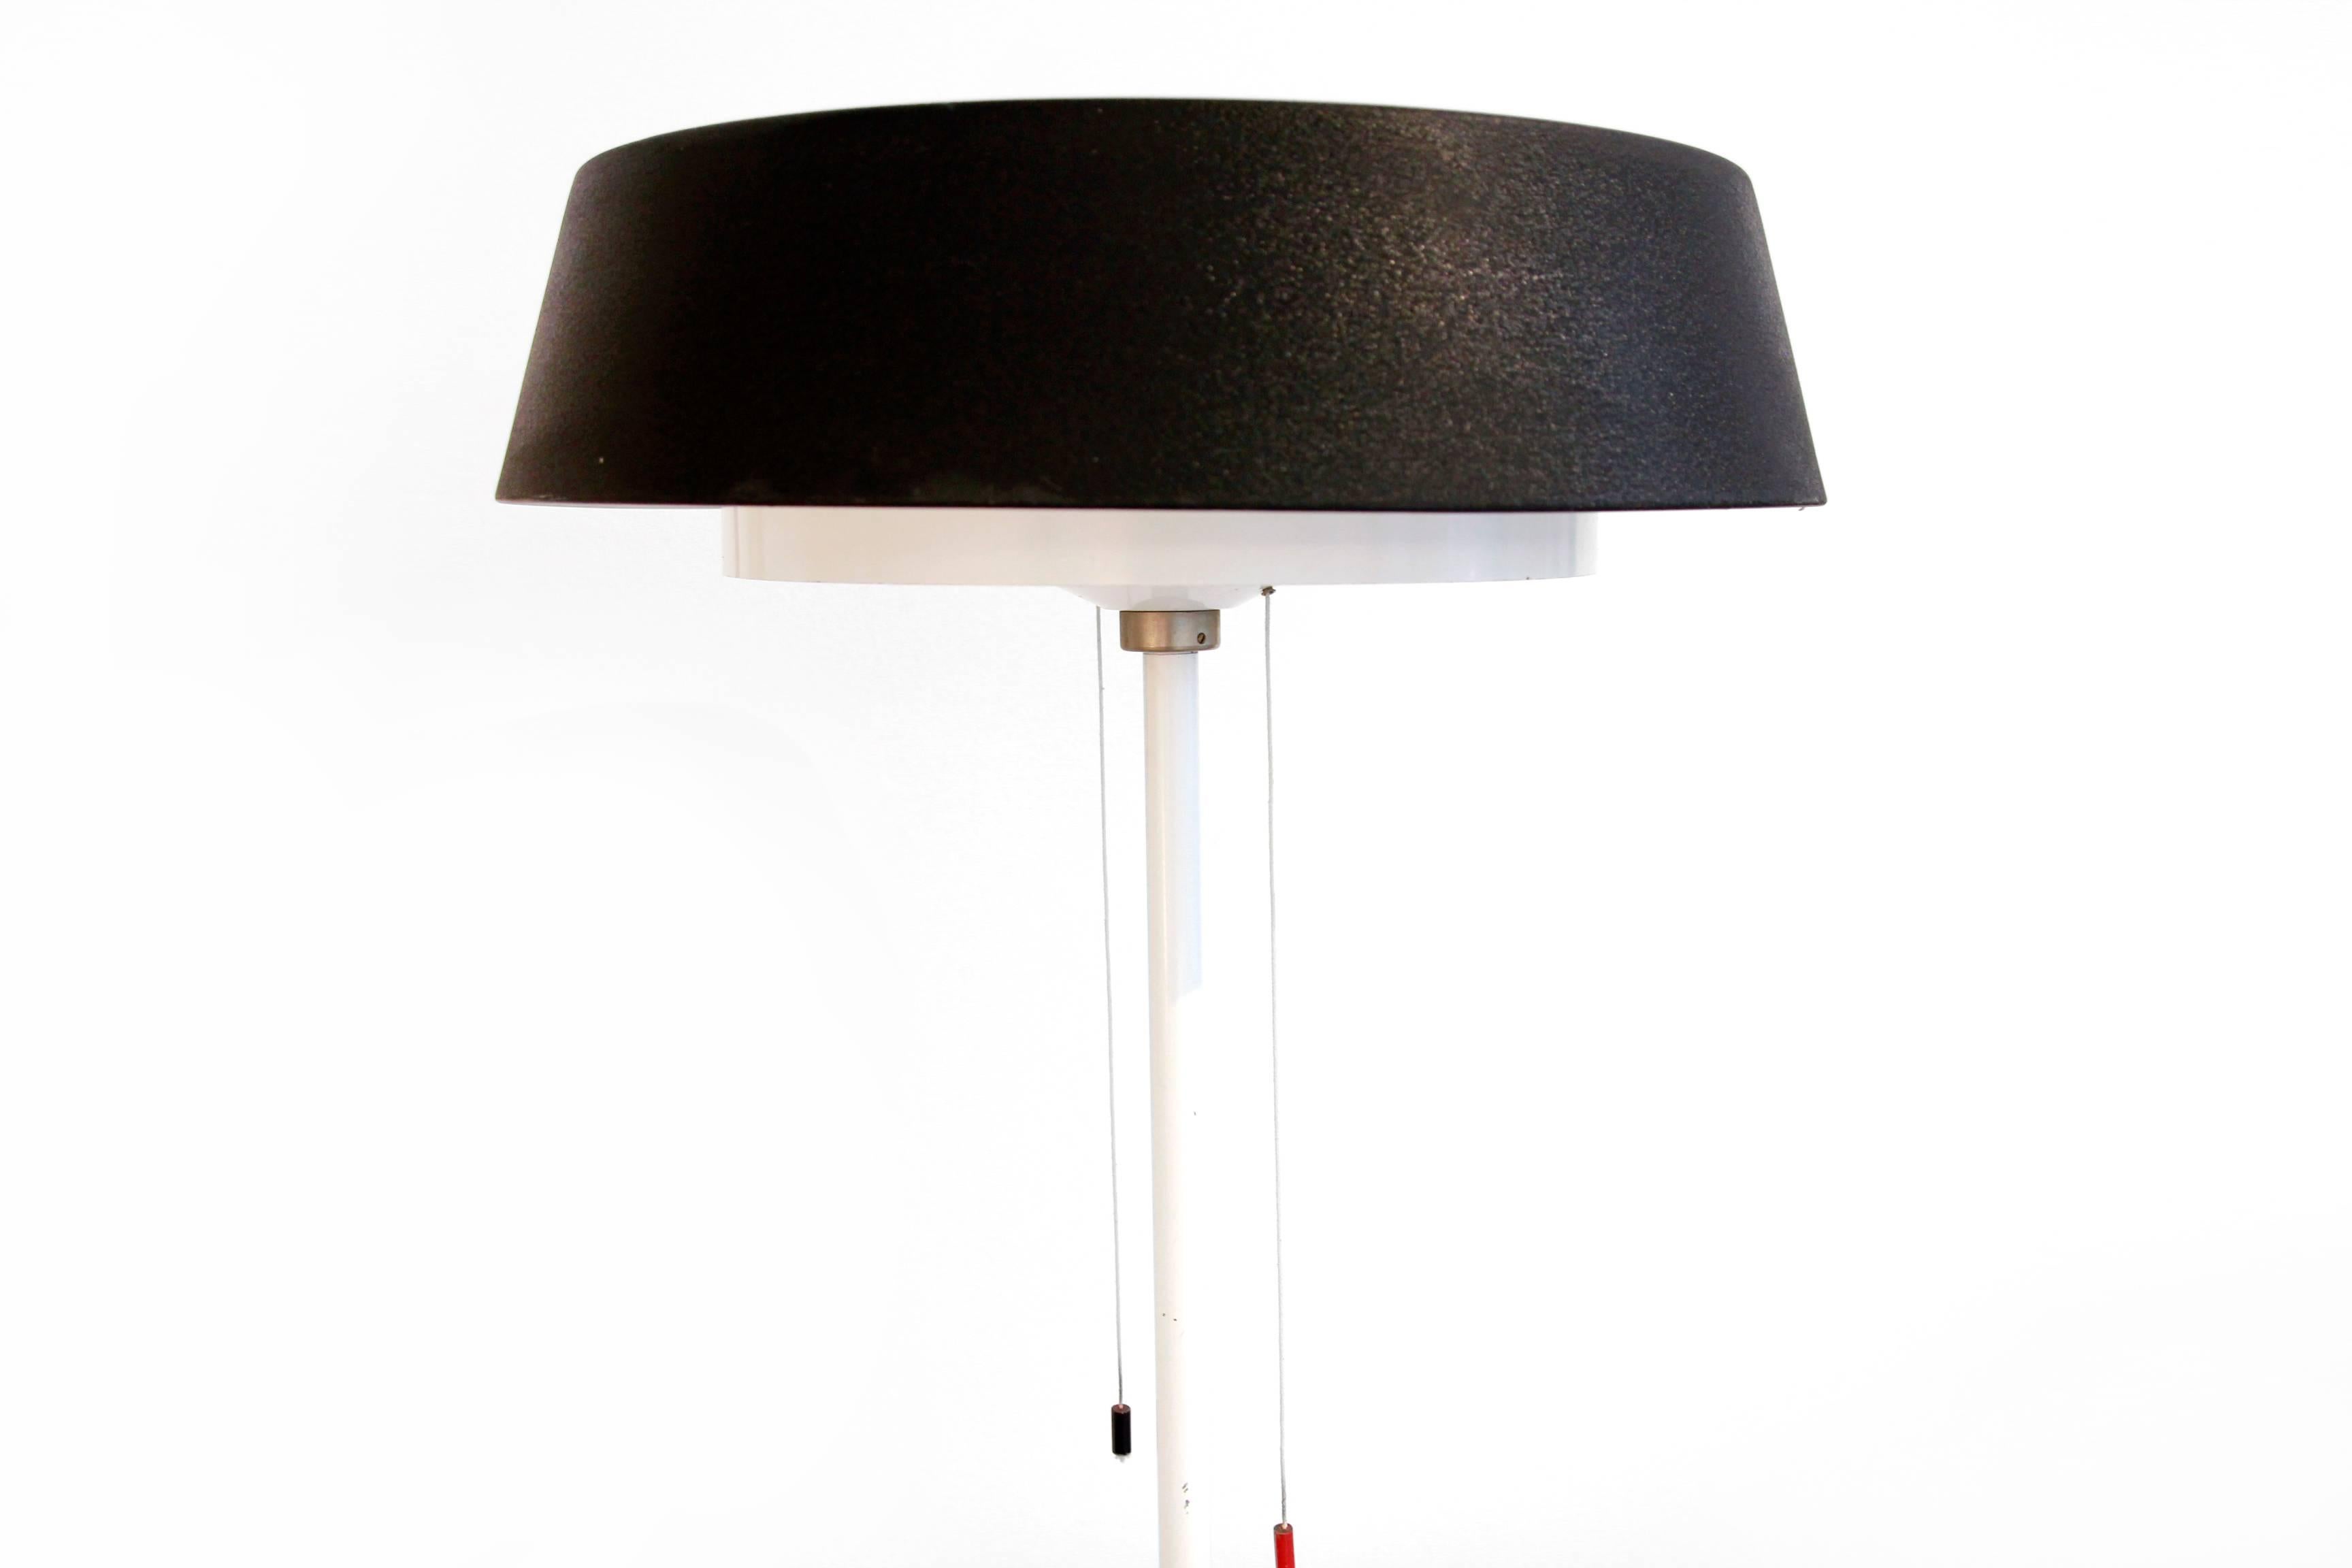 Lacquered Dutch Minimalist Floor Lamp by Niek Hiemstra for Evolux Model ST 7128/A